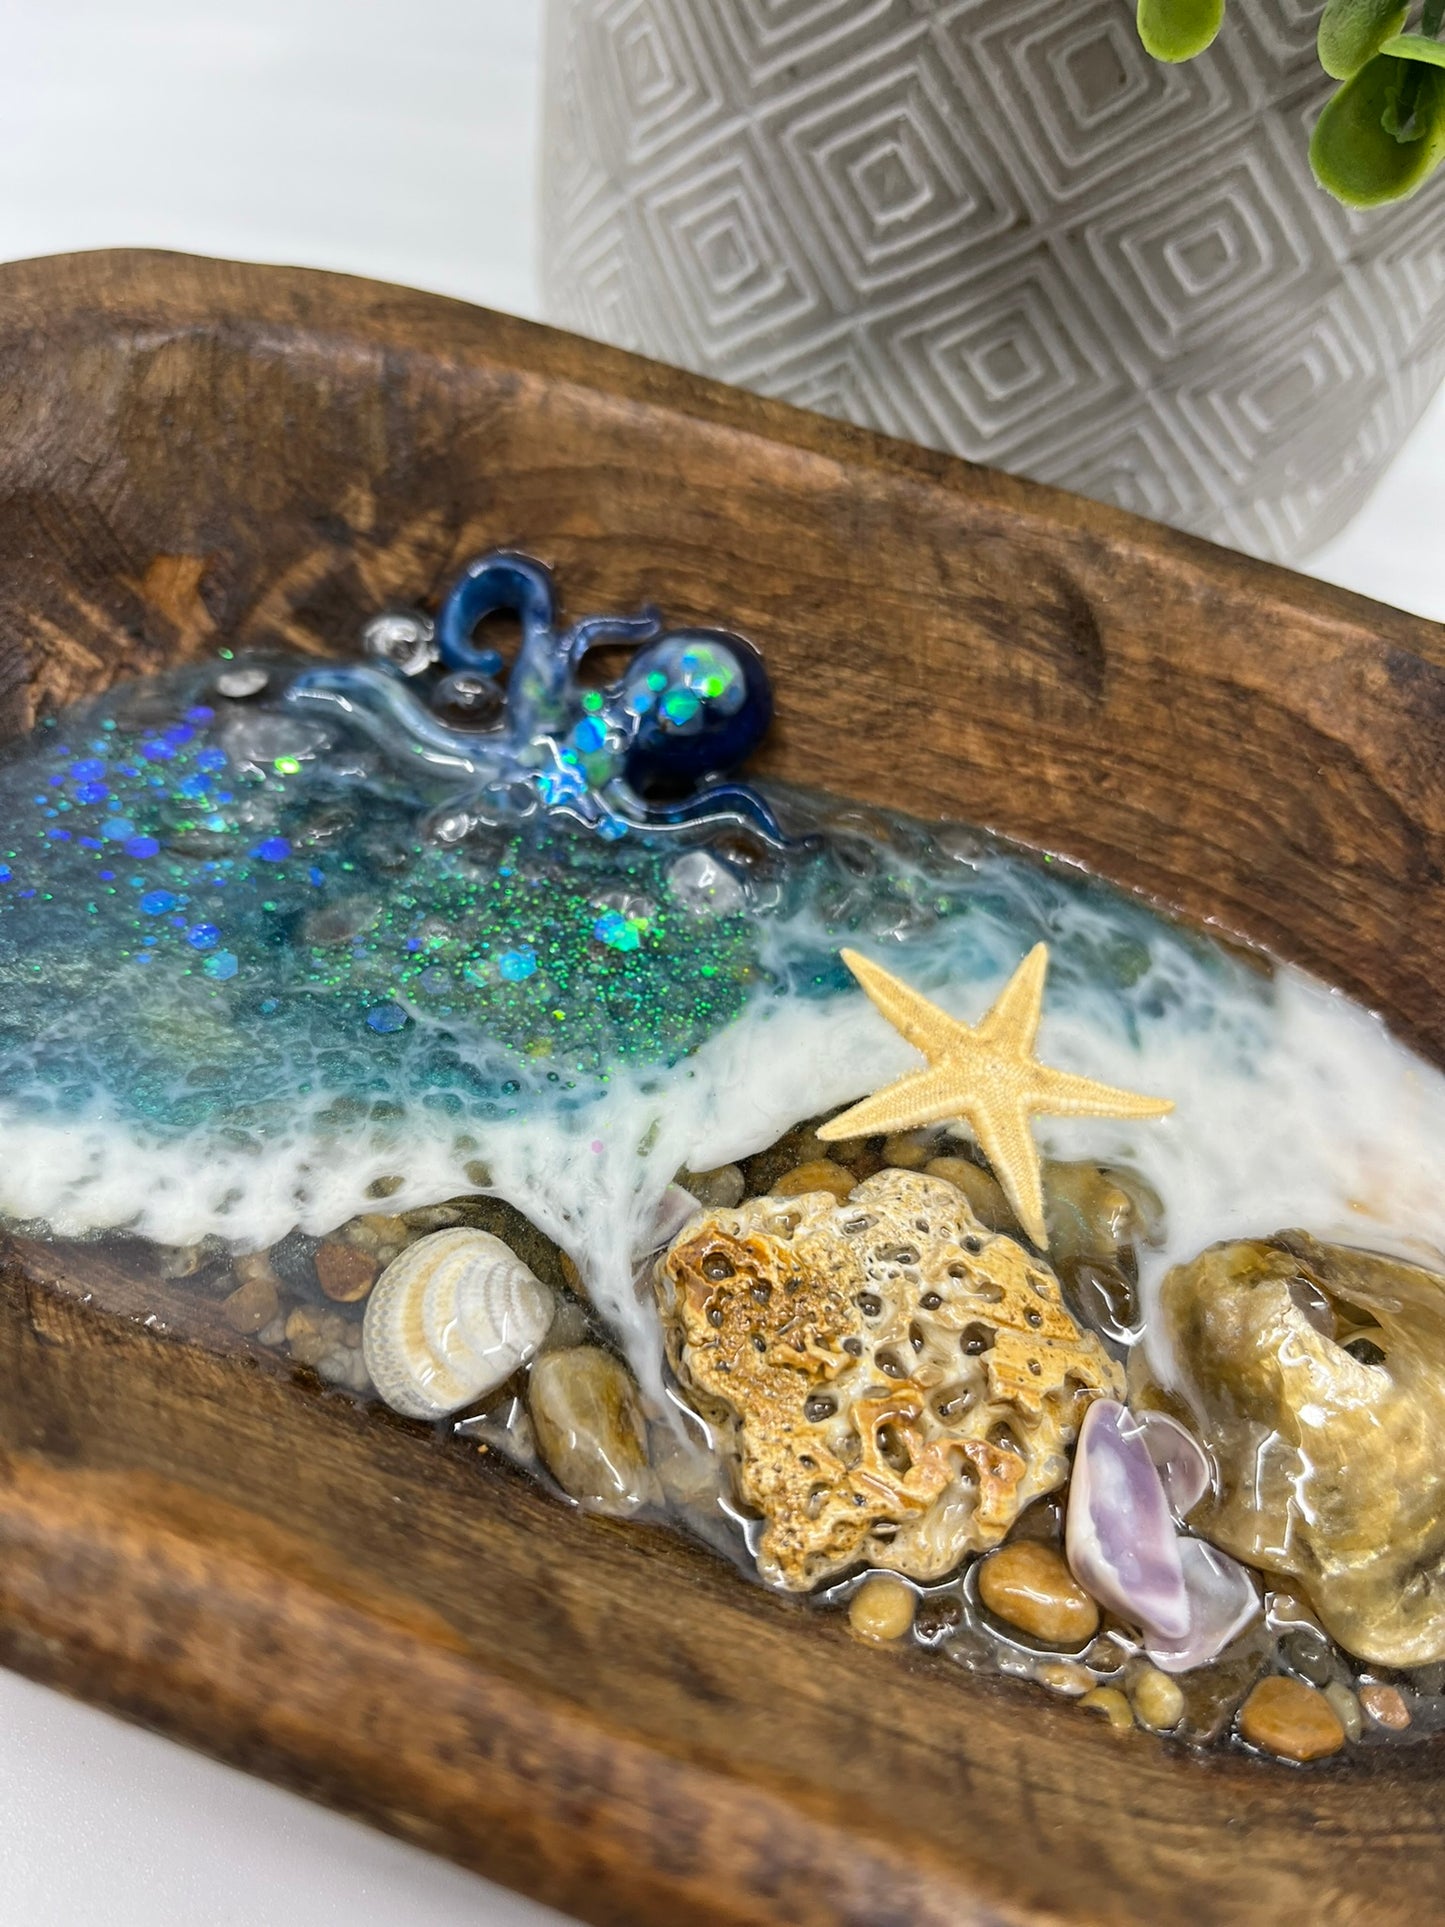 Wooden Primitive Dough Bowl with Ocean Resin Octopus and Outer Banks Shells